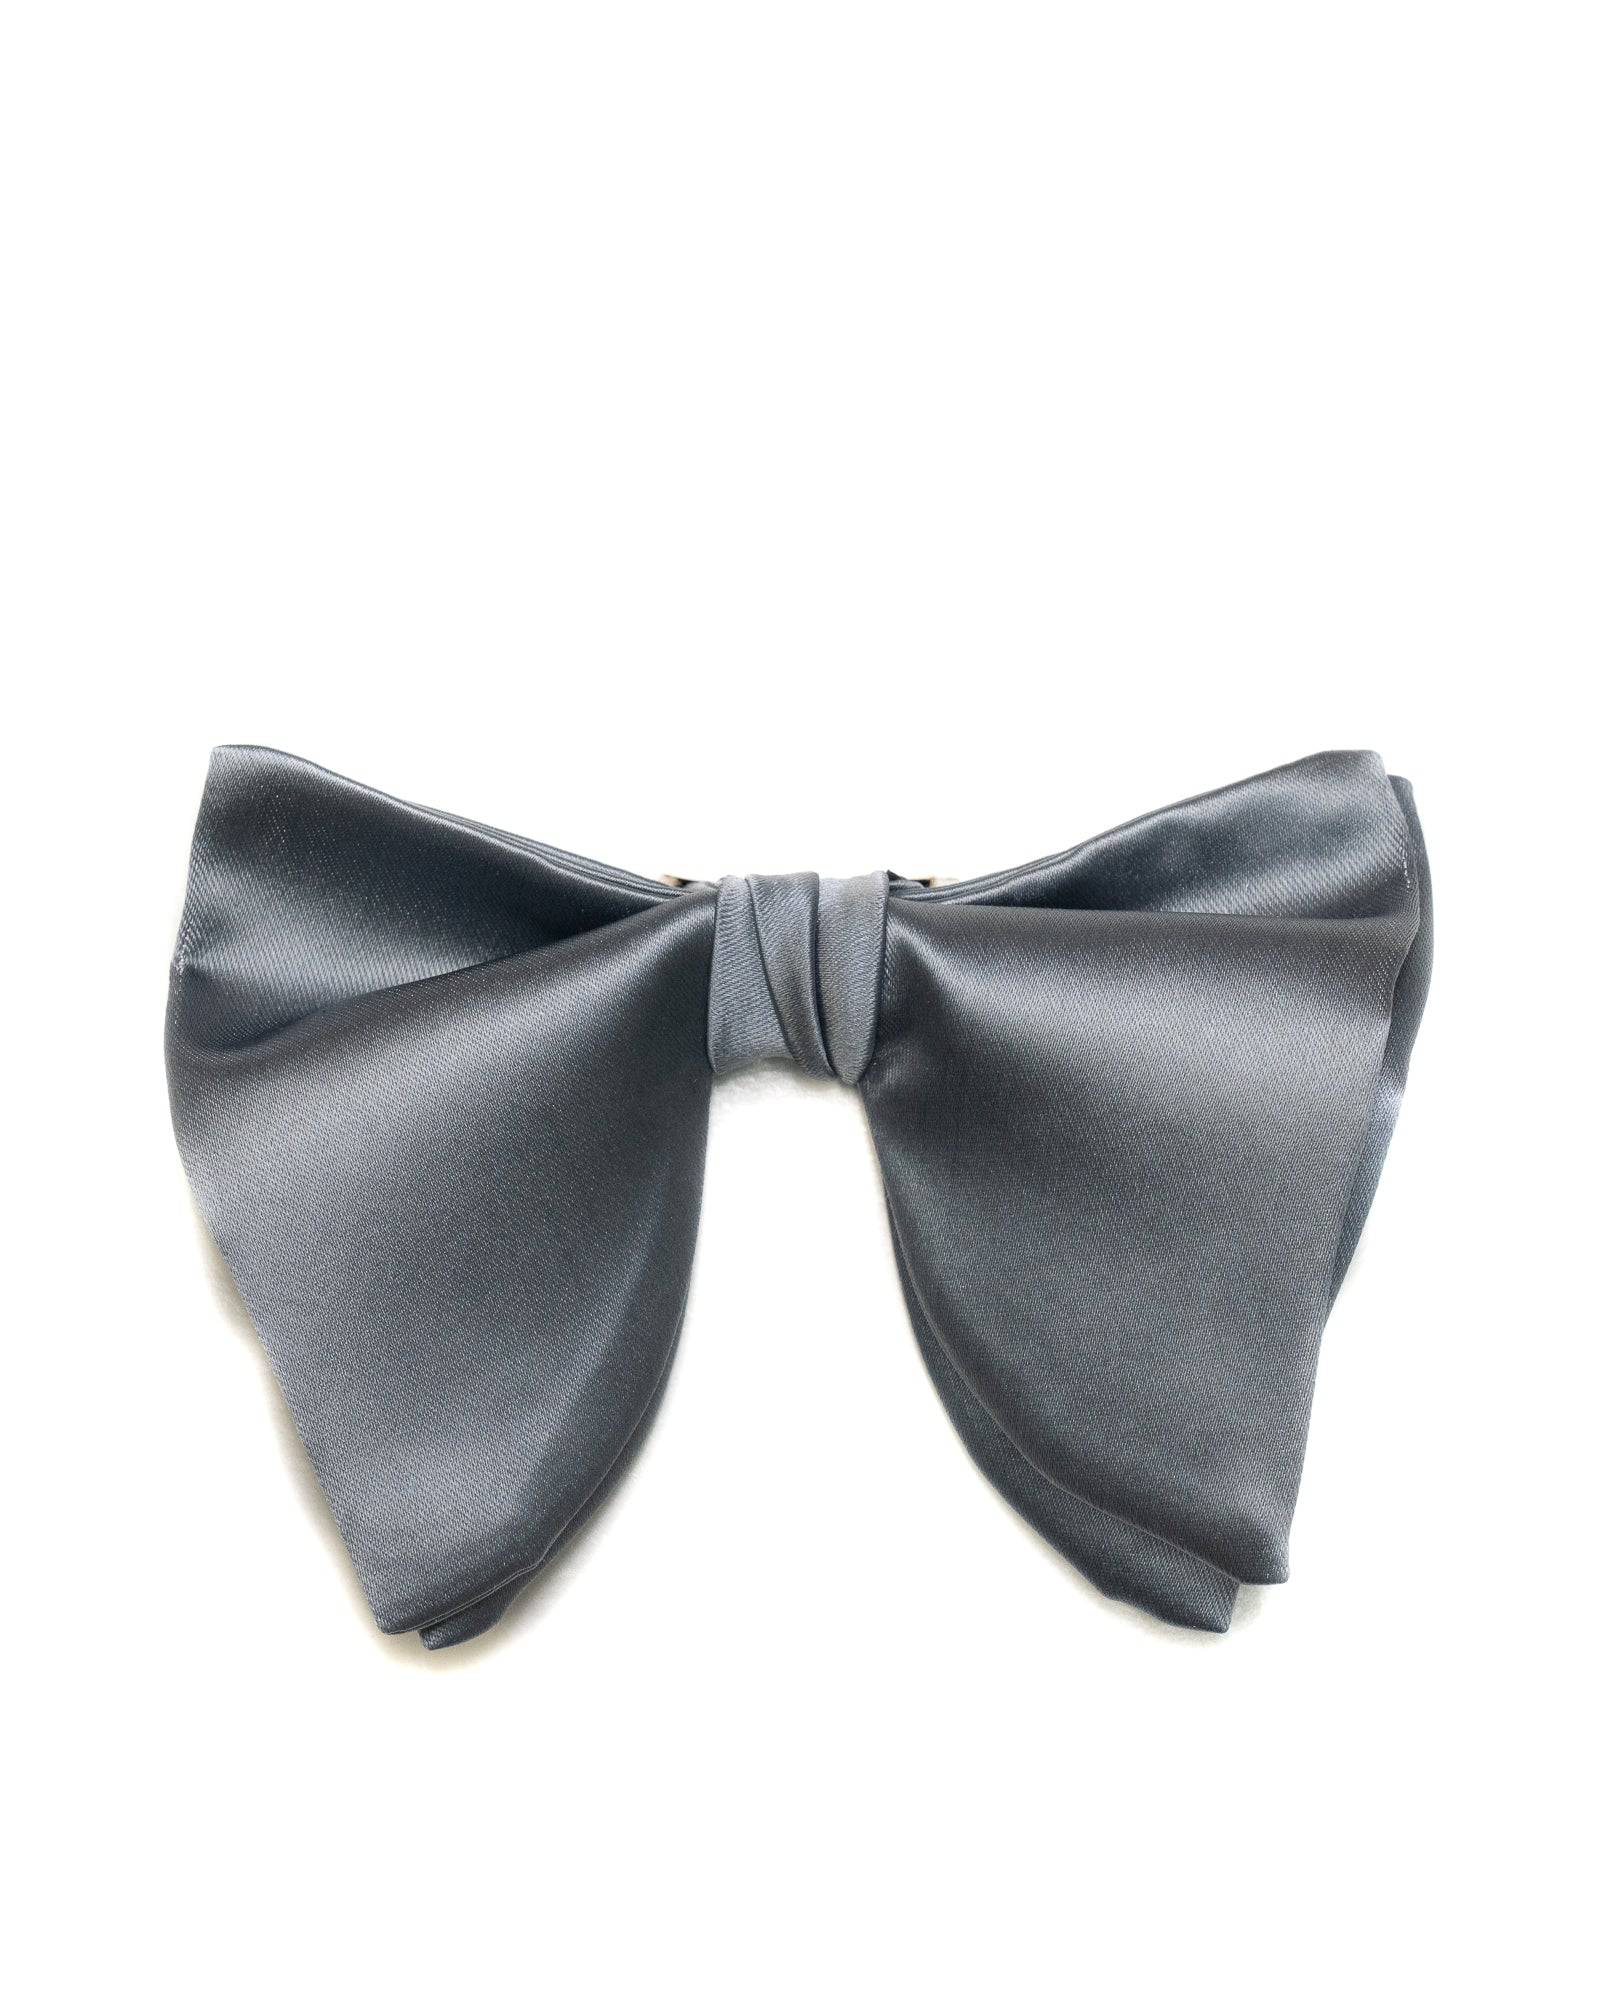 Bow Tie In Butterfly Shape Solid Satin Grey - Rainwater's Men's Clothing and Tuxedo Rental